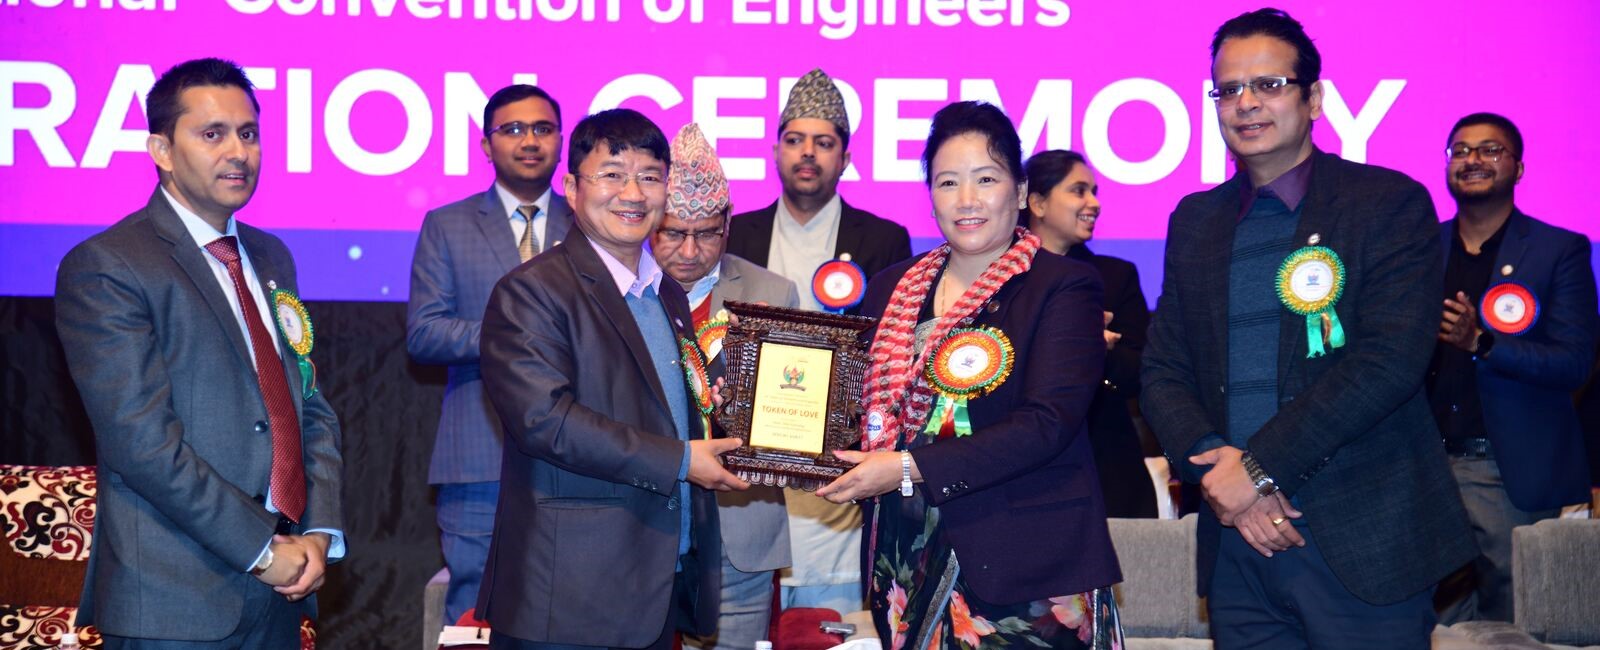 16th National Convention of Engineers